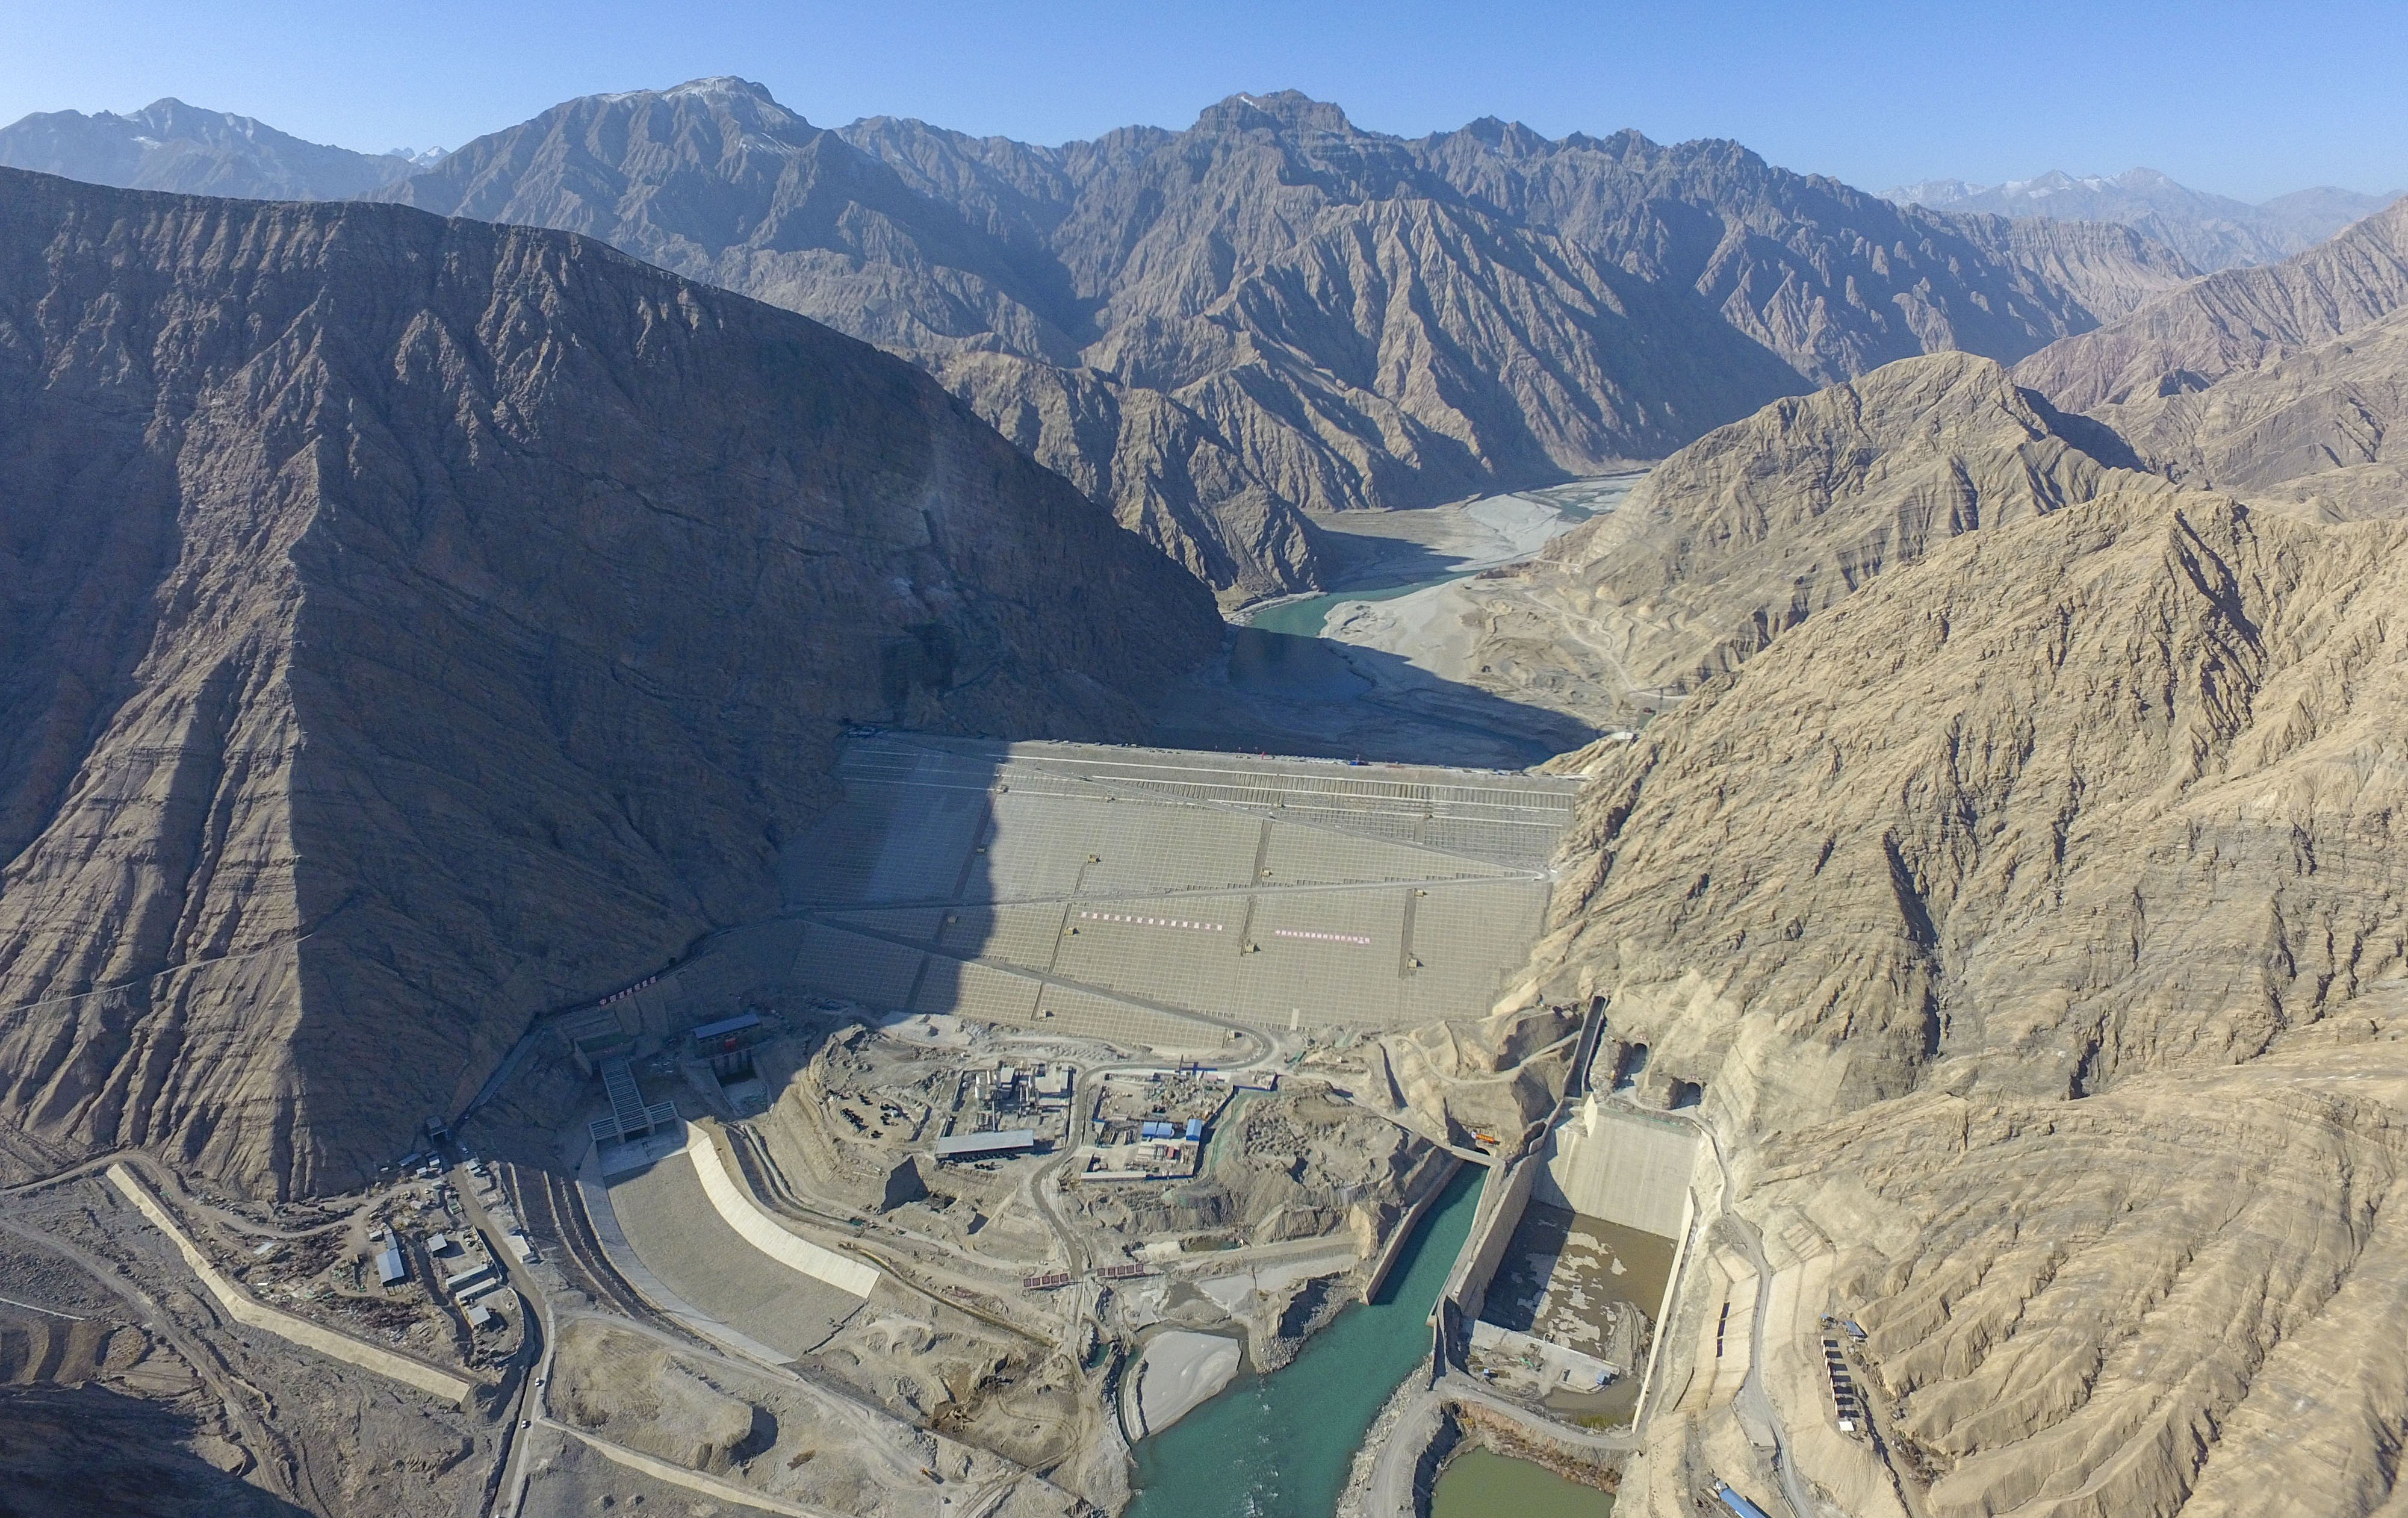 China has built dozens of hydropower dams, including this one on the Yarkant River in Xinjiang. Photo: Xinhua